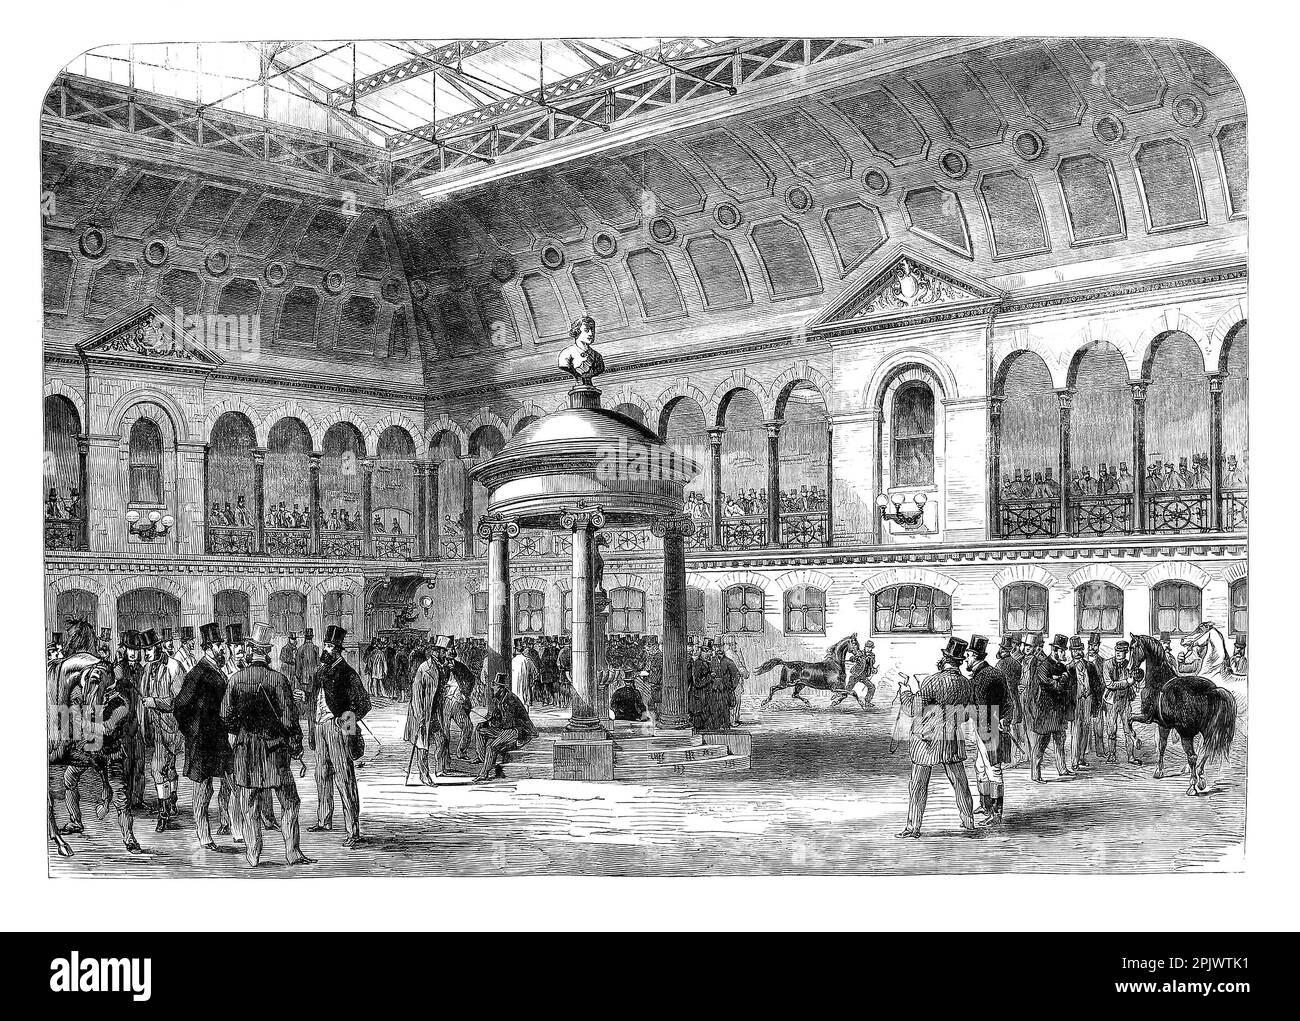 The first sale in 1865, Tattersall's new buildings in Knightsbridge, a residential and retail district in central London, England. Tattersalls (formerly Tattersall's) is the main auctioneer of race horses in the United Kingdom and Ireland. Stock Photo